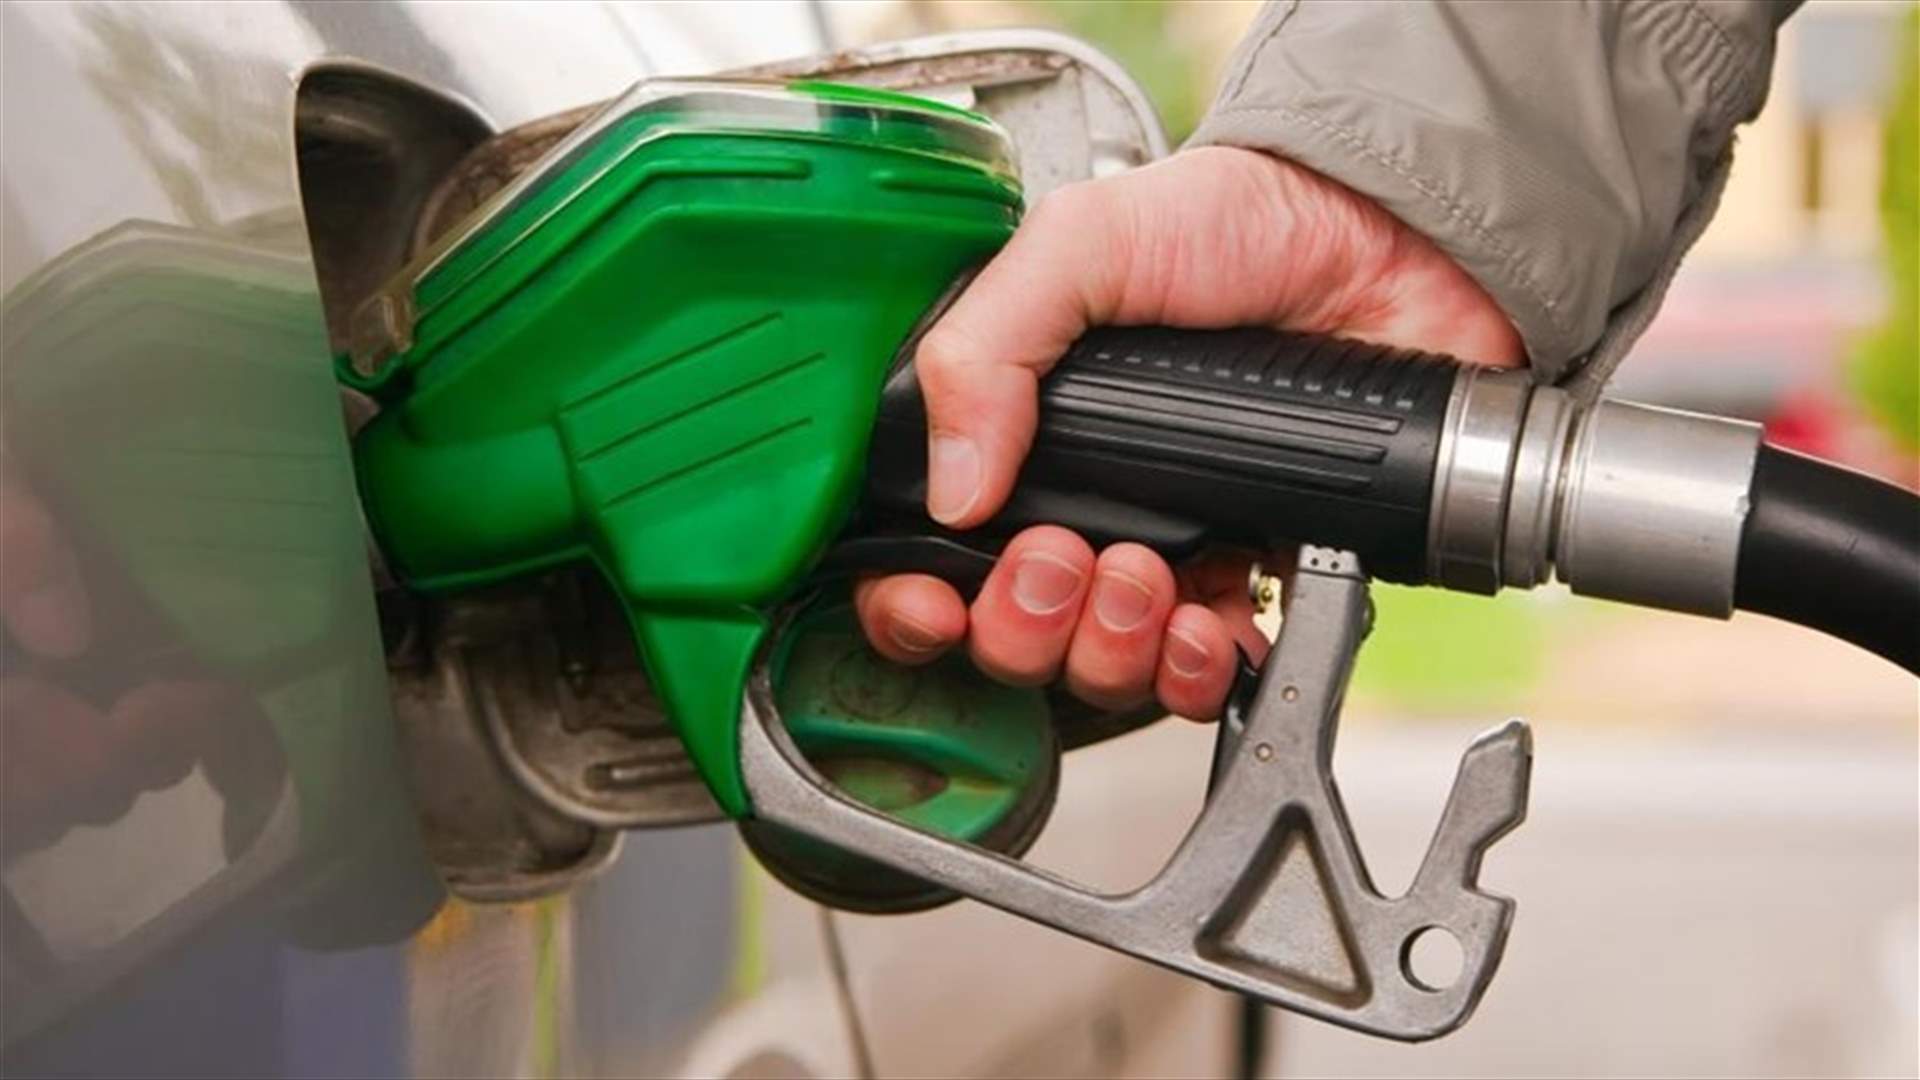 Price of diesel oil, fuel oil and gasoline 95 octanes remains unchanged